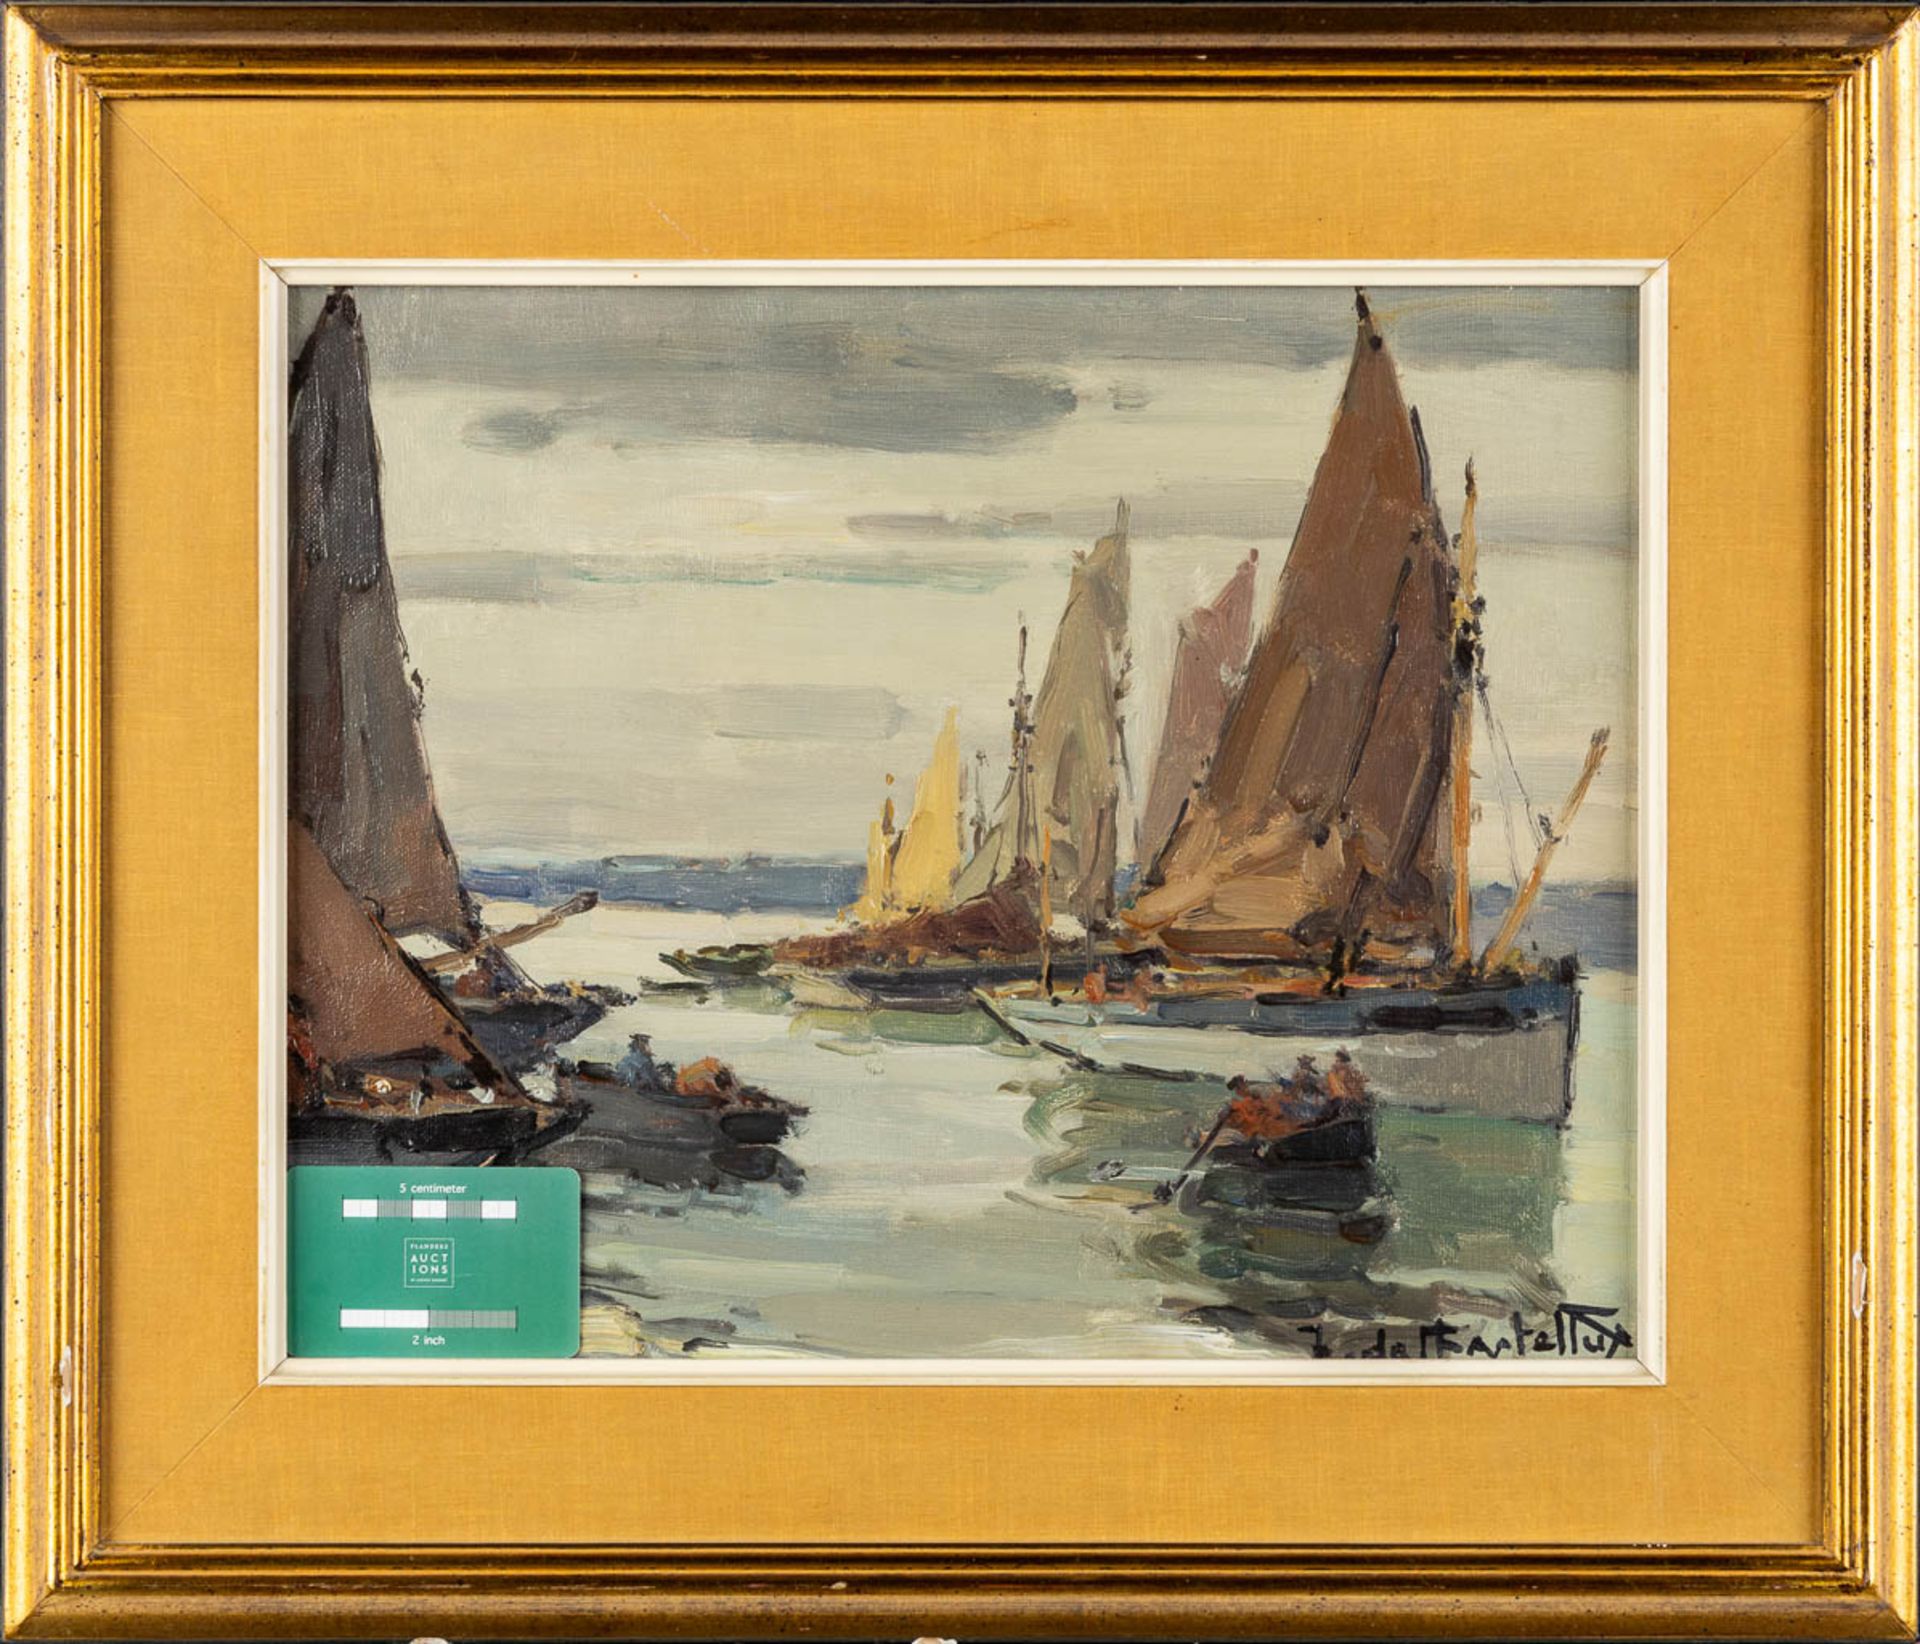 Jacques DE CHASTELLUS (1894-1957) 'Fishing Boats' oil on canvas. (W:40 x H:32 cm) - Image 2 of 7